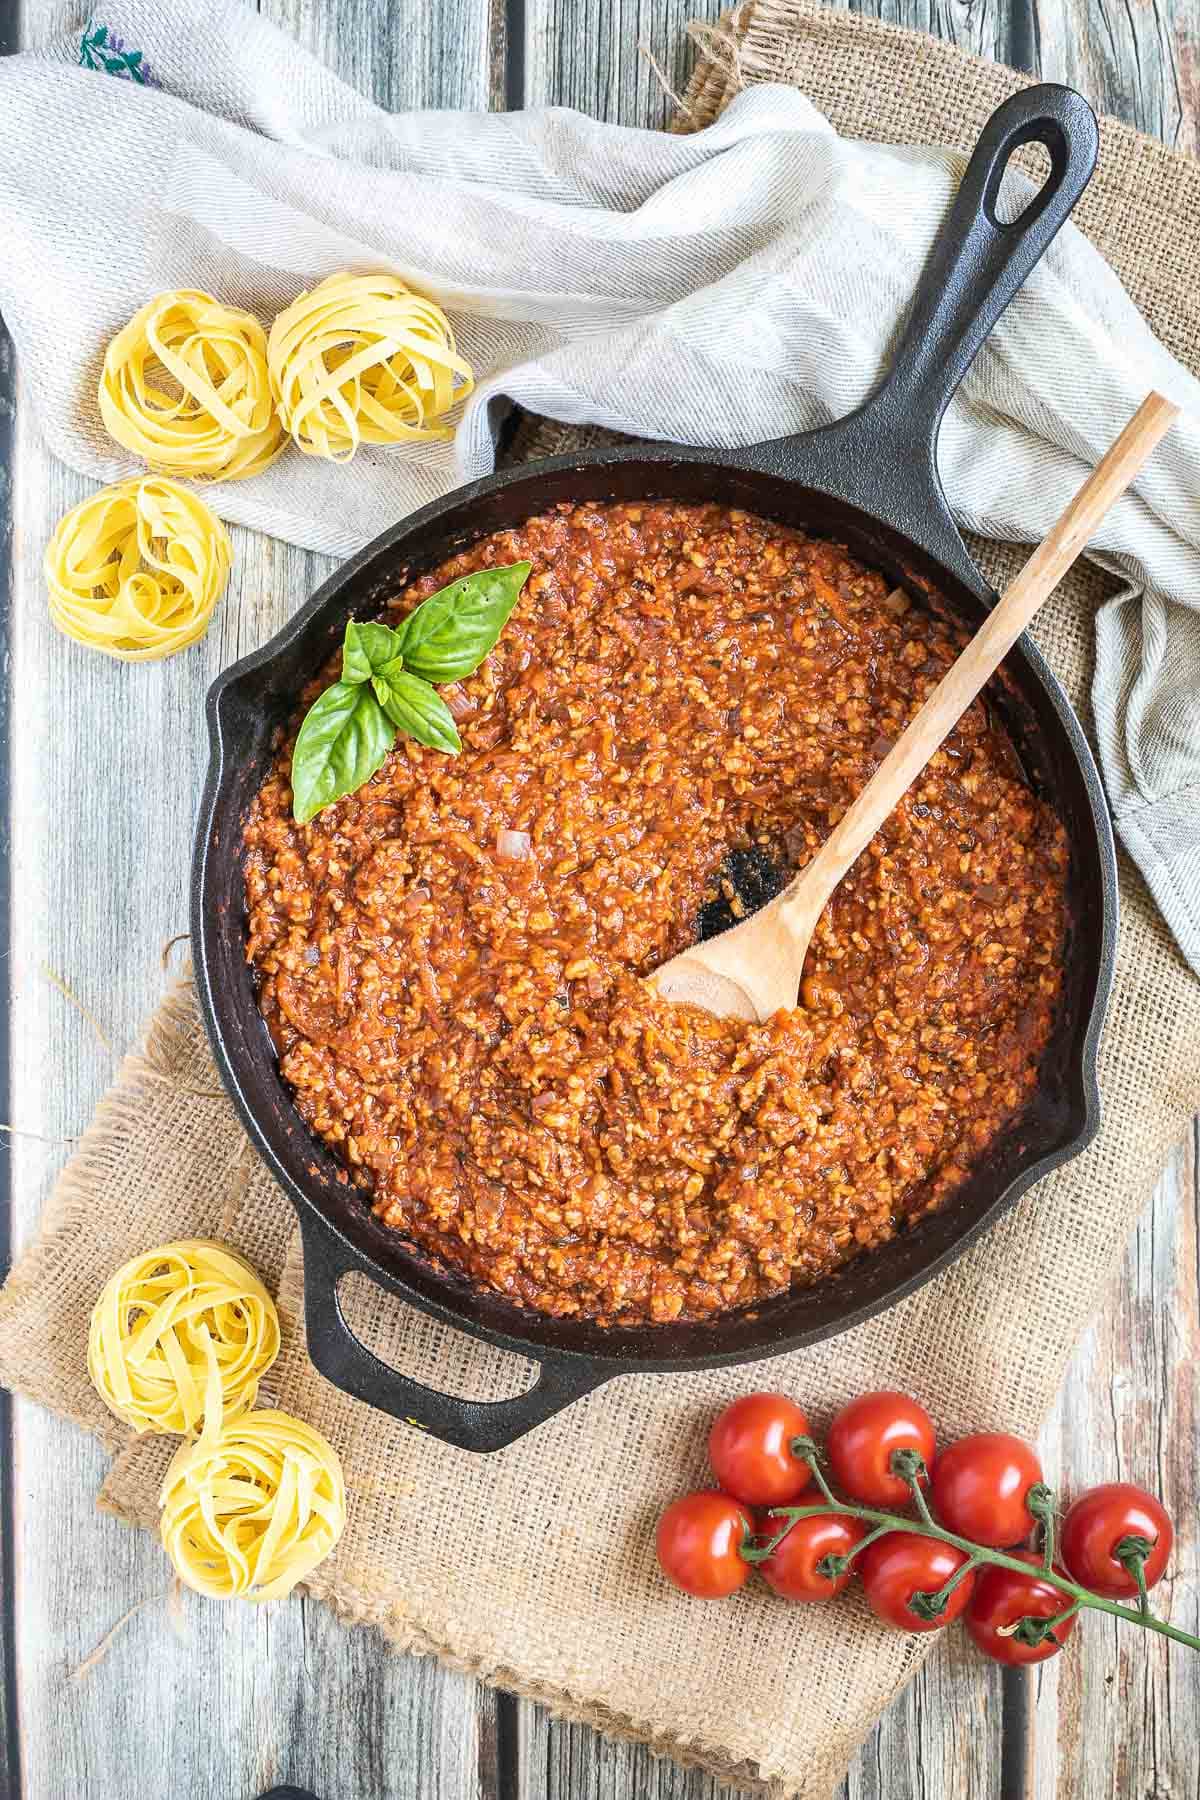 A cast iron skillet with meat-like crumbles in bolognese sauce. A wooden spatula is placed in the middle. Dry pasta and cherry tomatoes are around it.